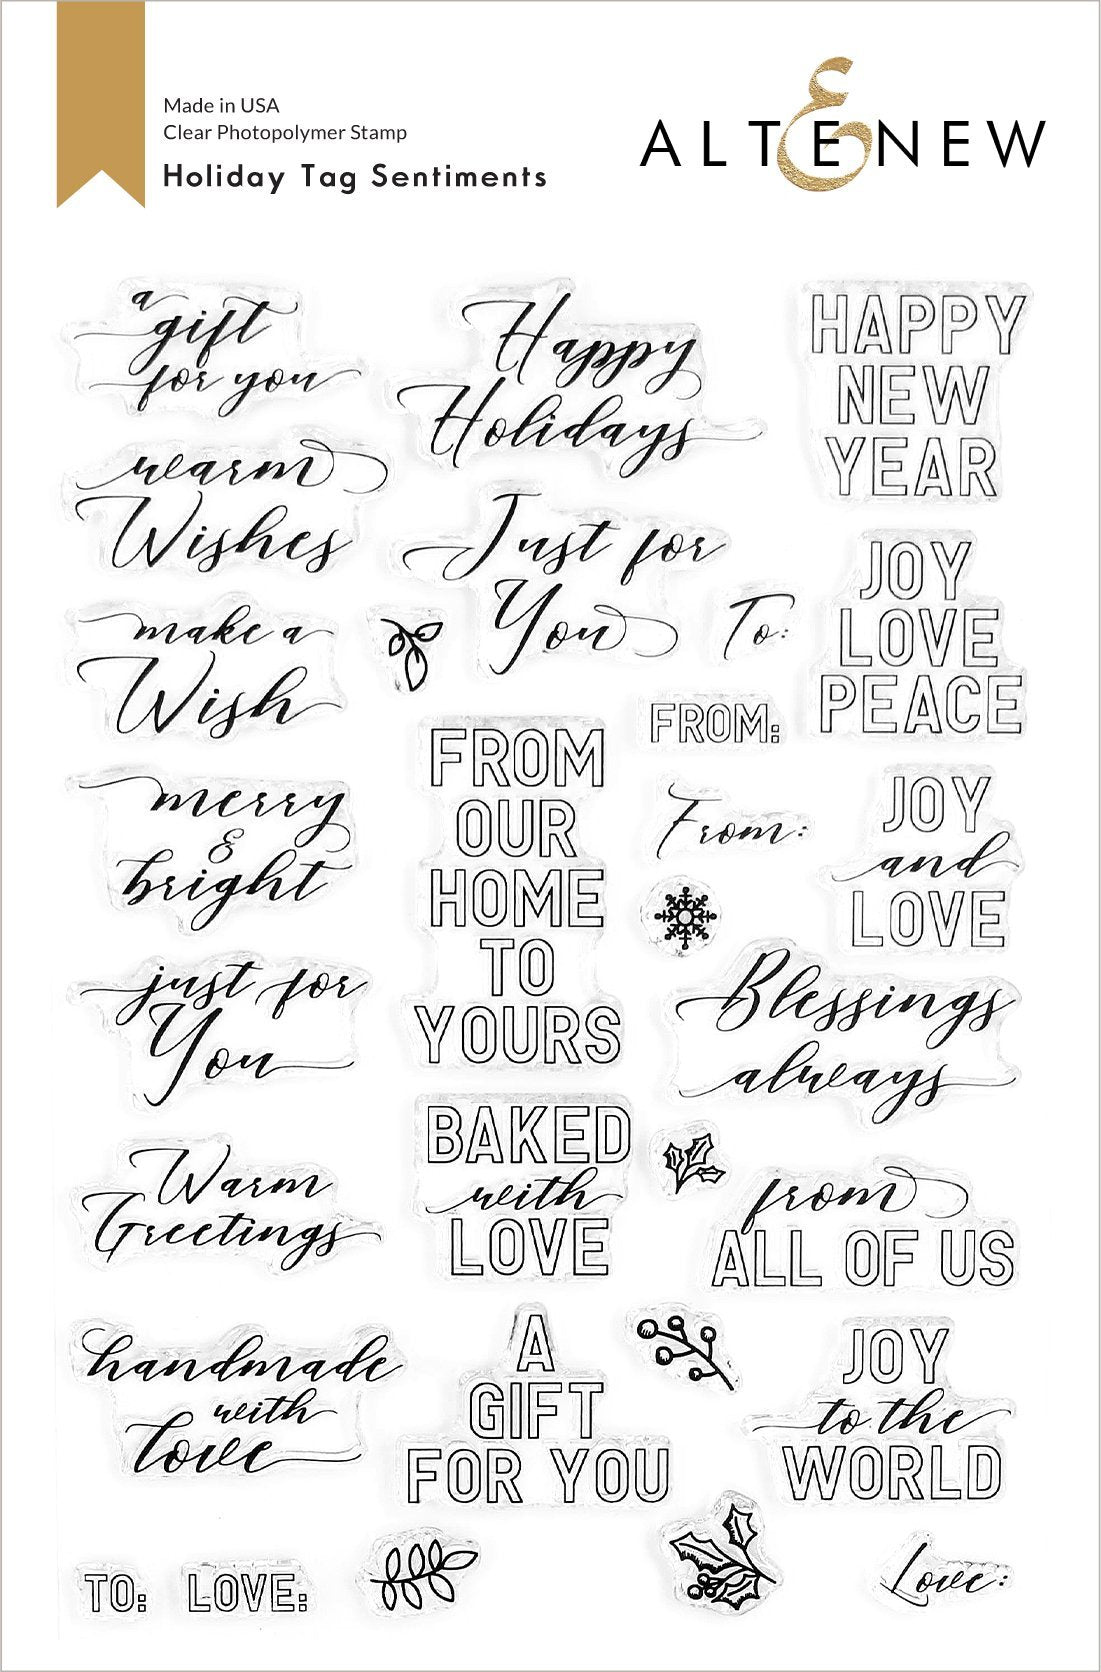 Altenew - Holiday Tag Sentiments Stamp - out of stock